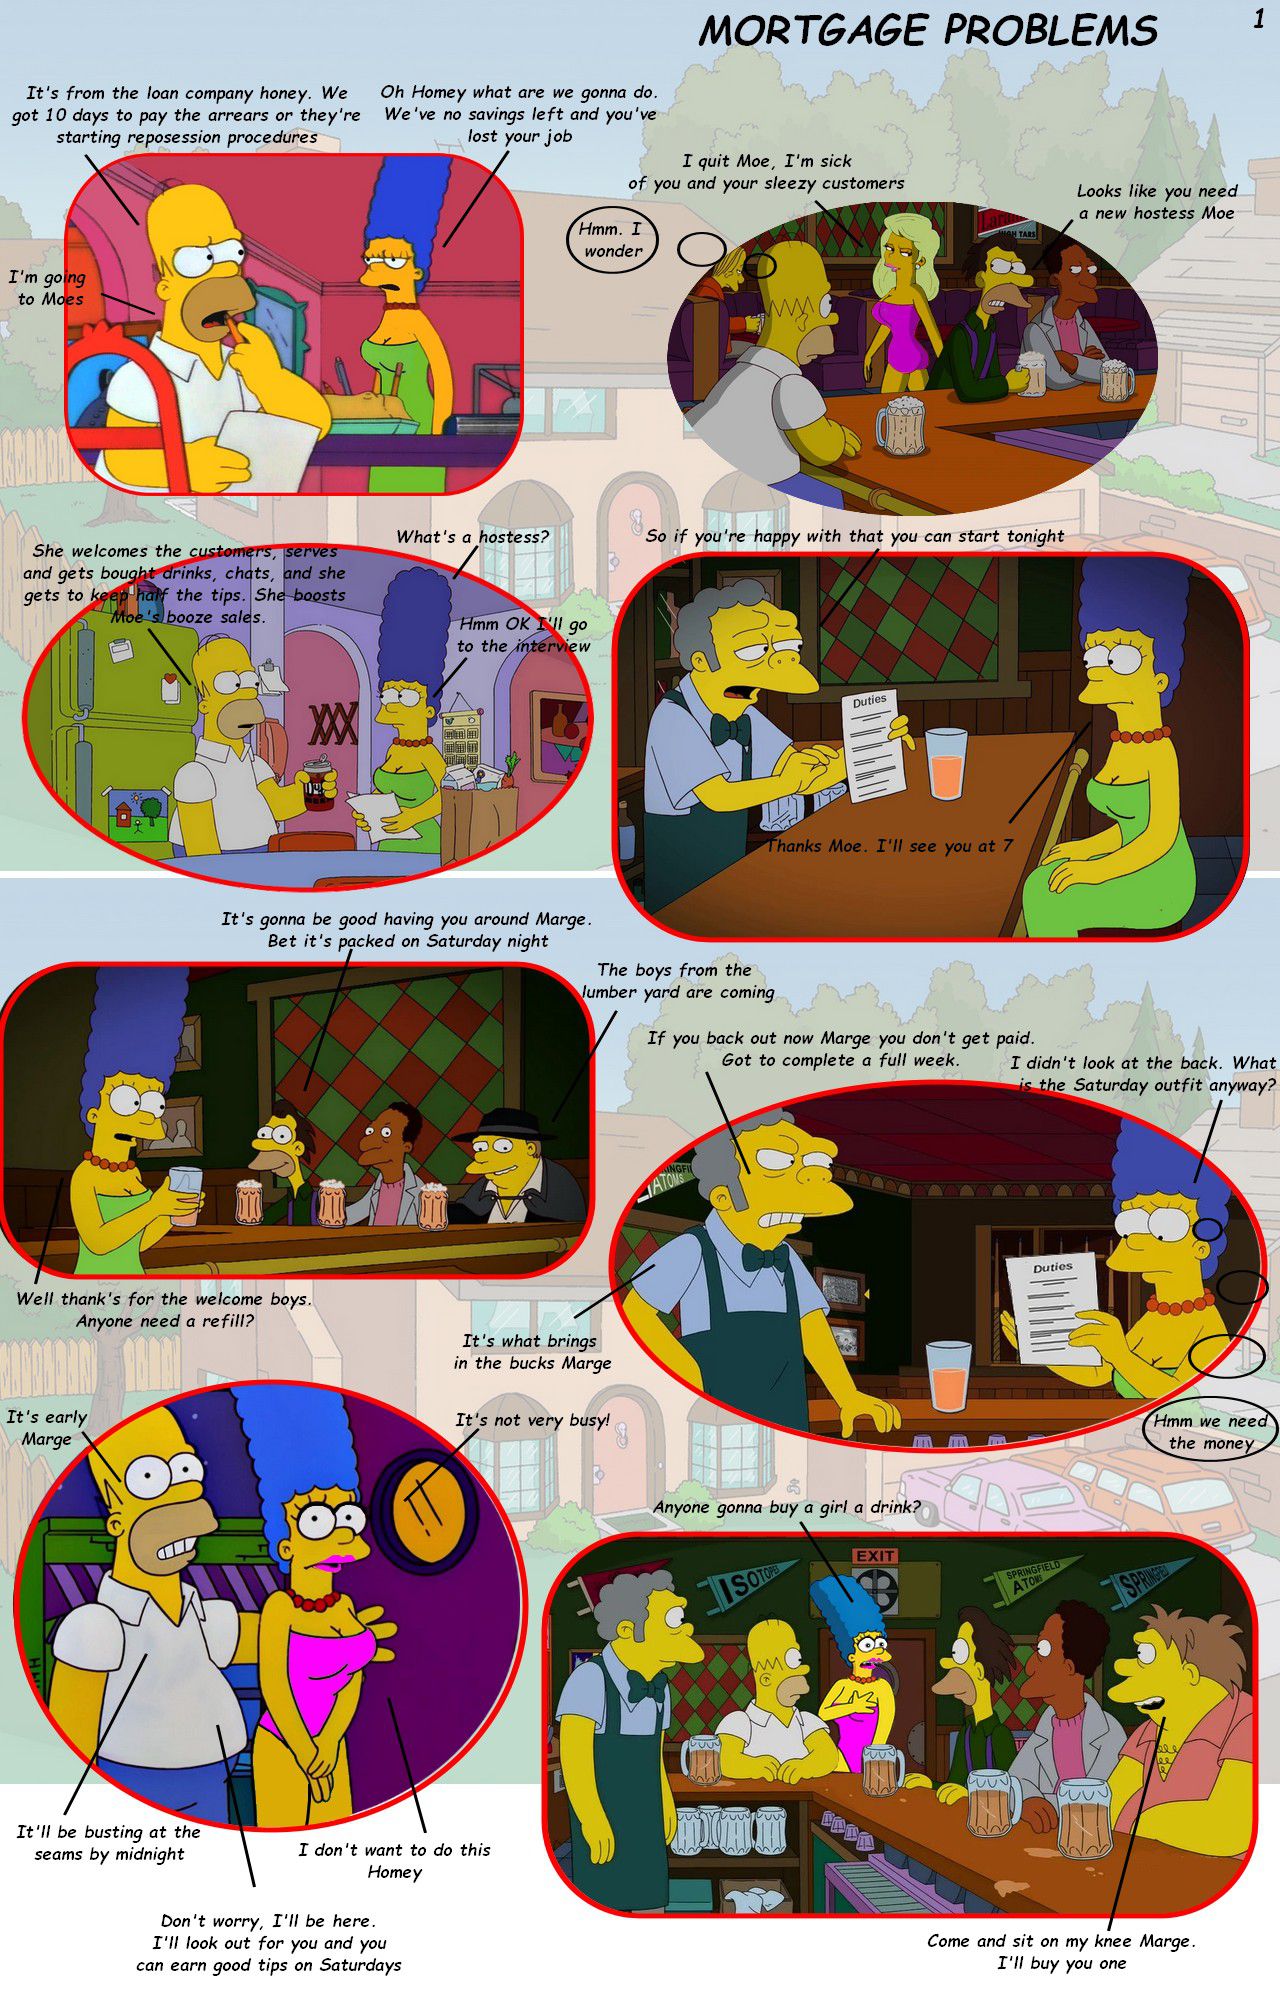 Mortgage Problems (The Simpsons) - Mortgage Problems - (The Simpsons)